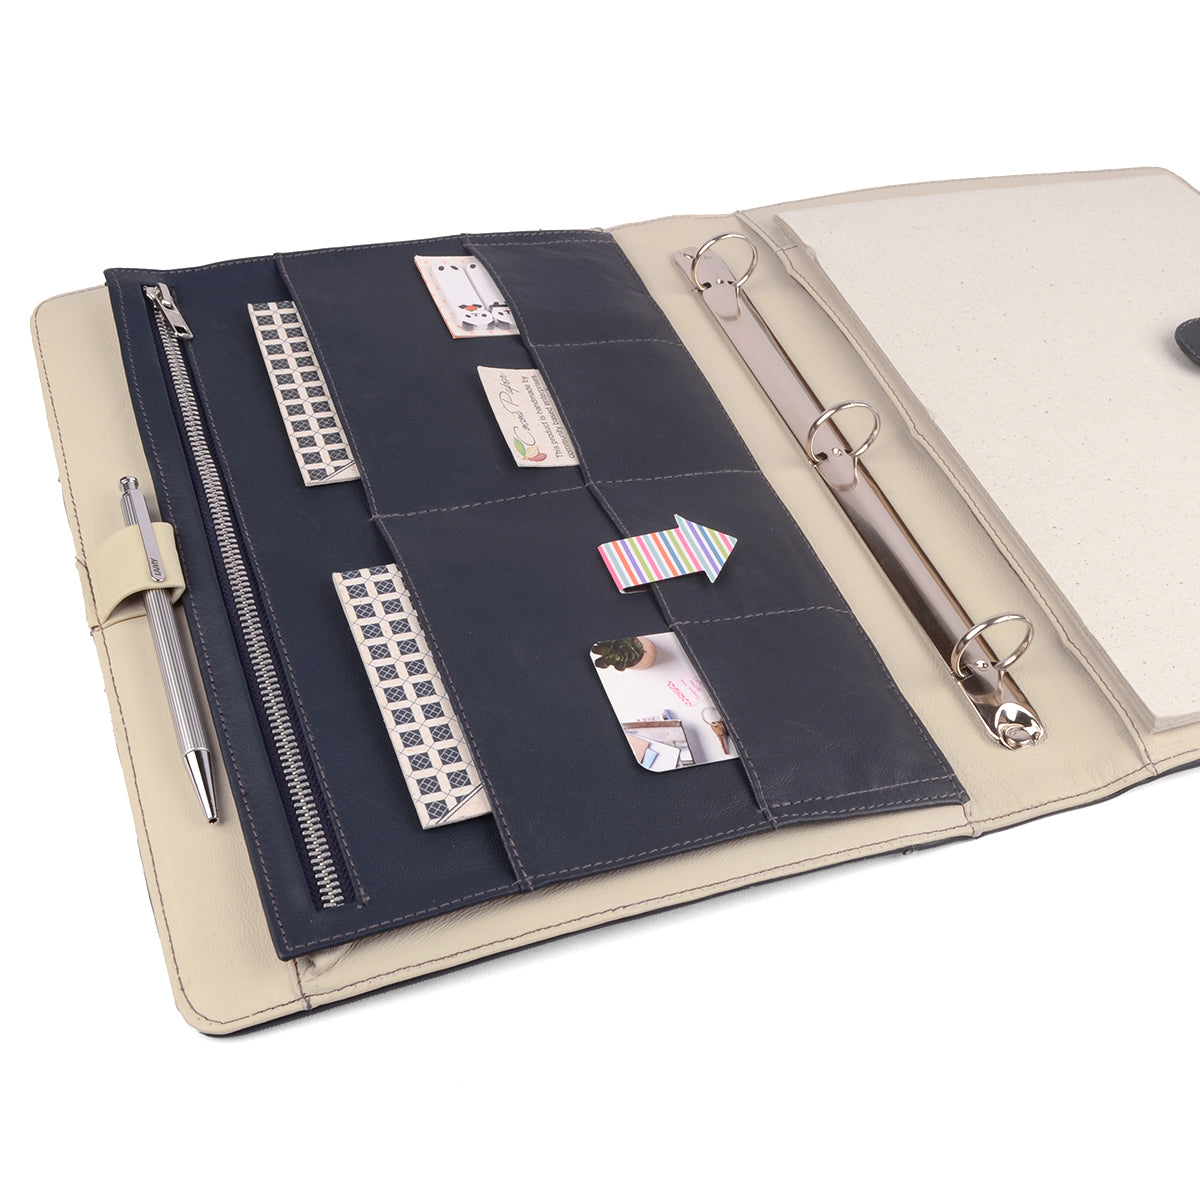 ORIGINAL A4 & USA Letter Size Ring Binder Planner Organizer. Personalized  and Lots of Colors 